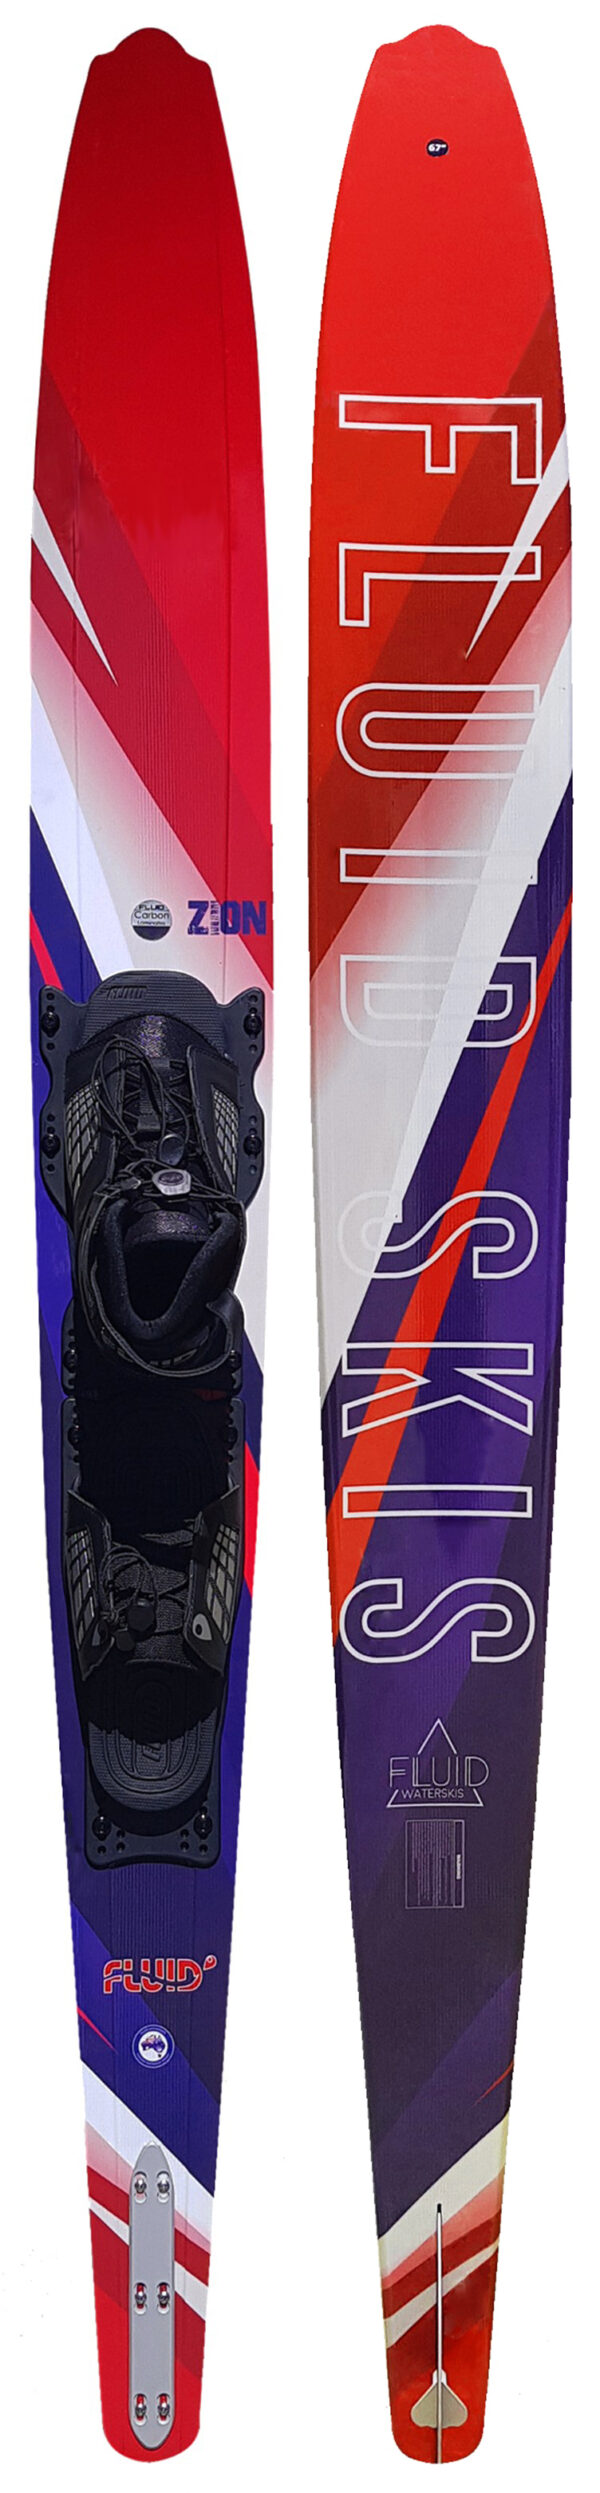 Fluid Zion Mens Slalom Ski With Onset Boot and ARTP